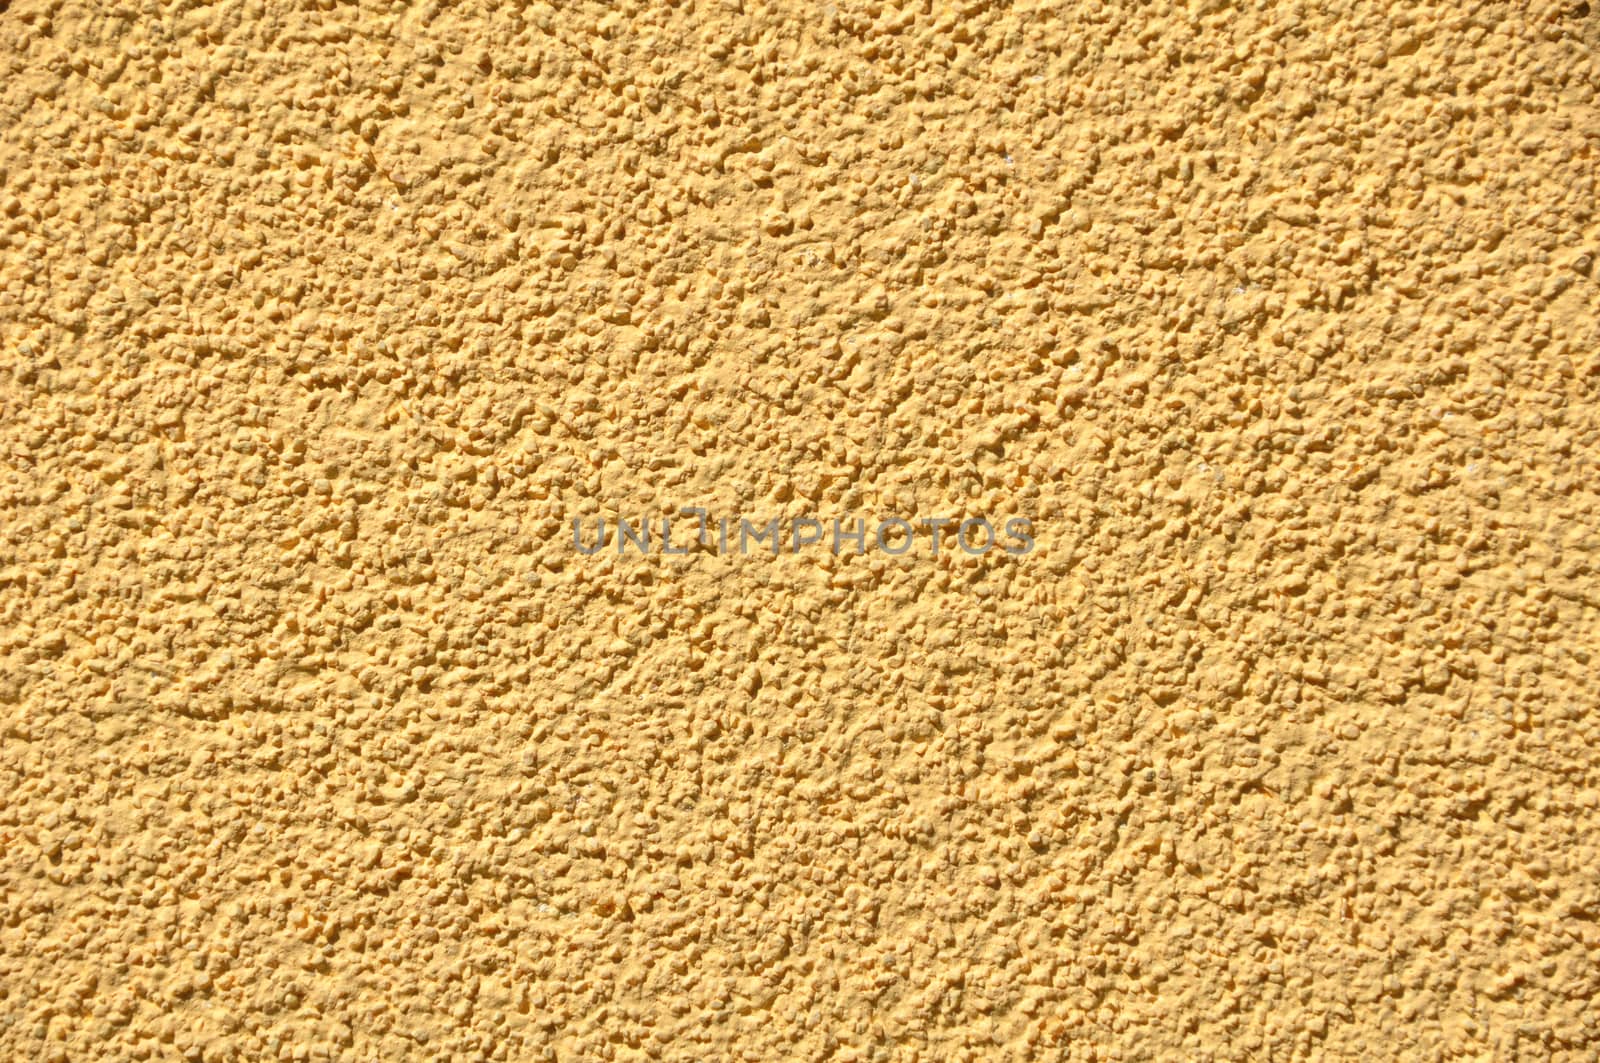 textured mortar for building wall